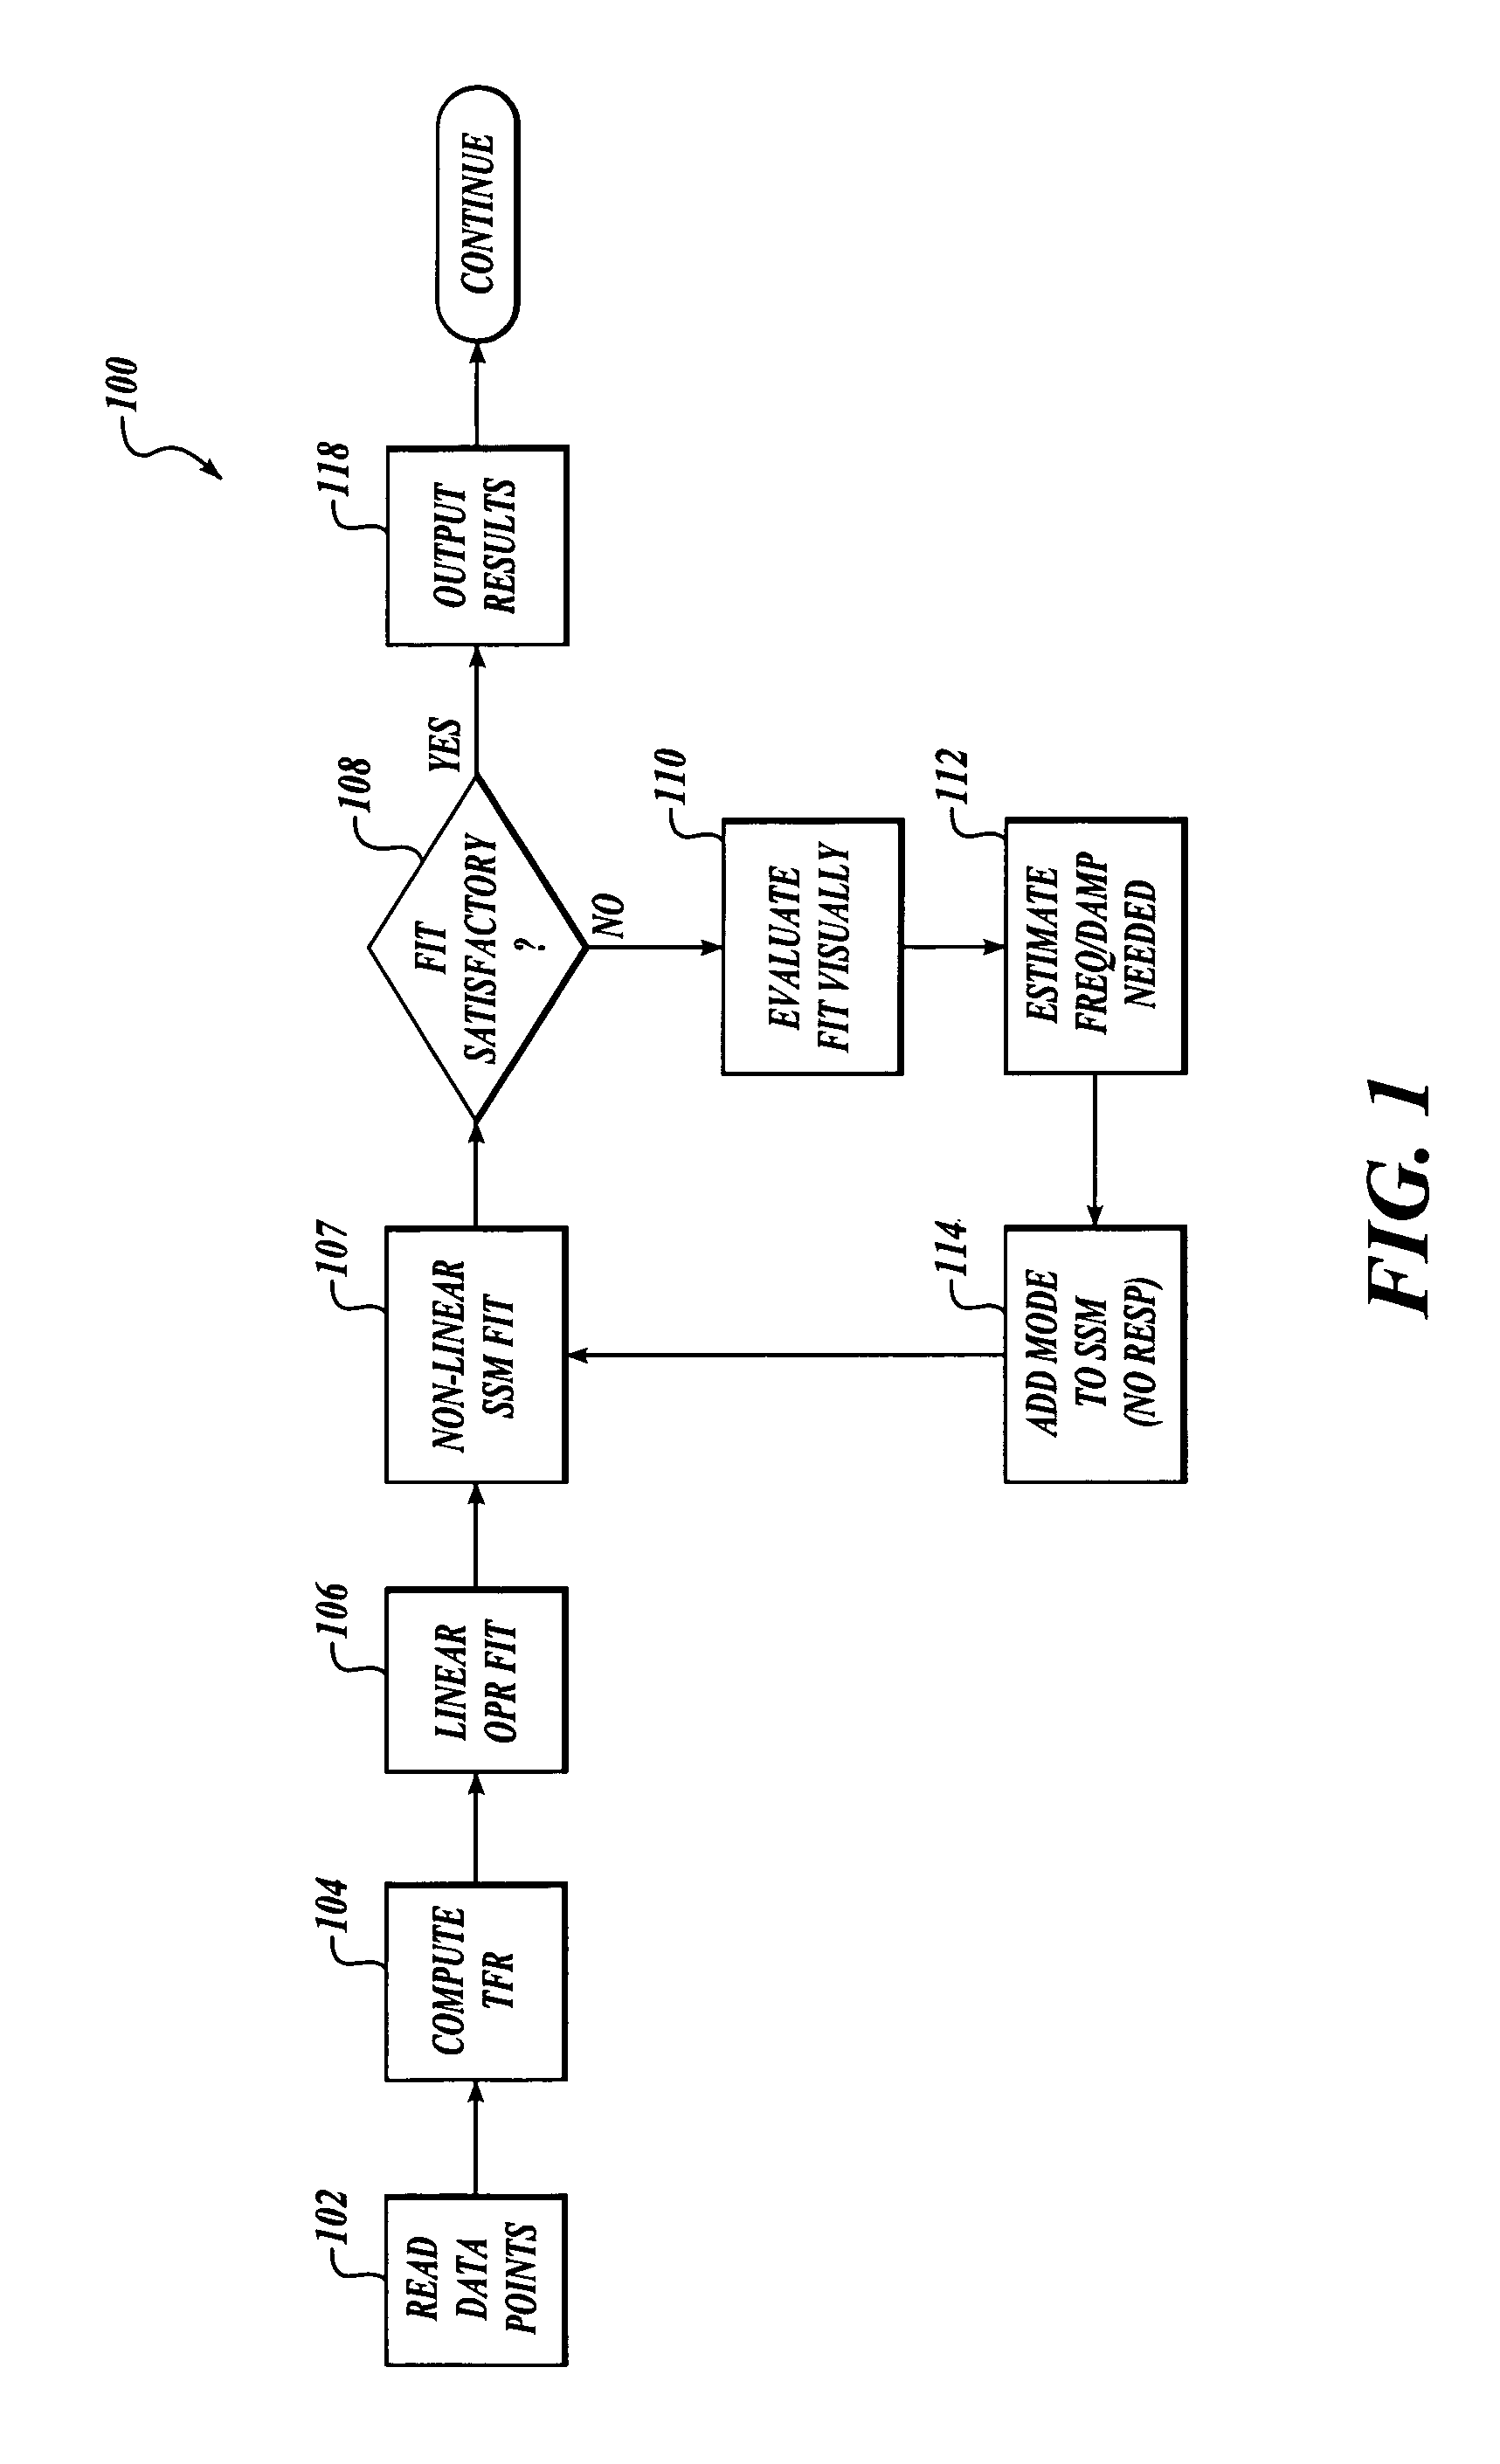 Methods and systems for analyzing flutter test data using non-linear transfer function frequency response fitting